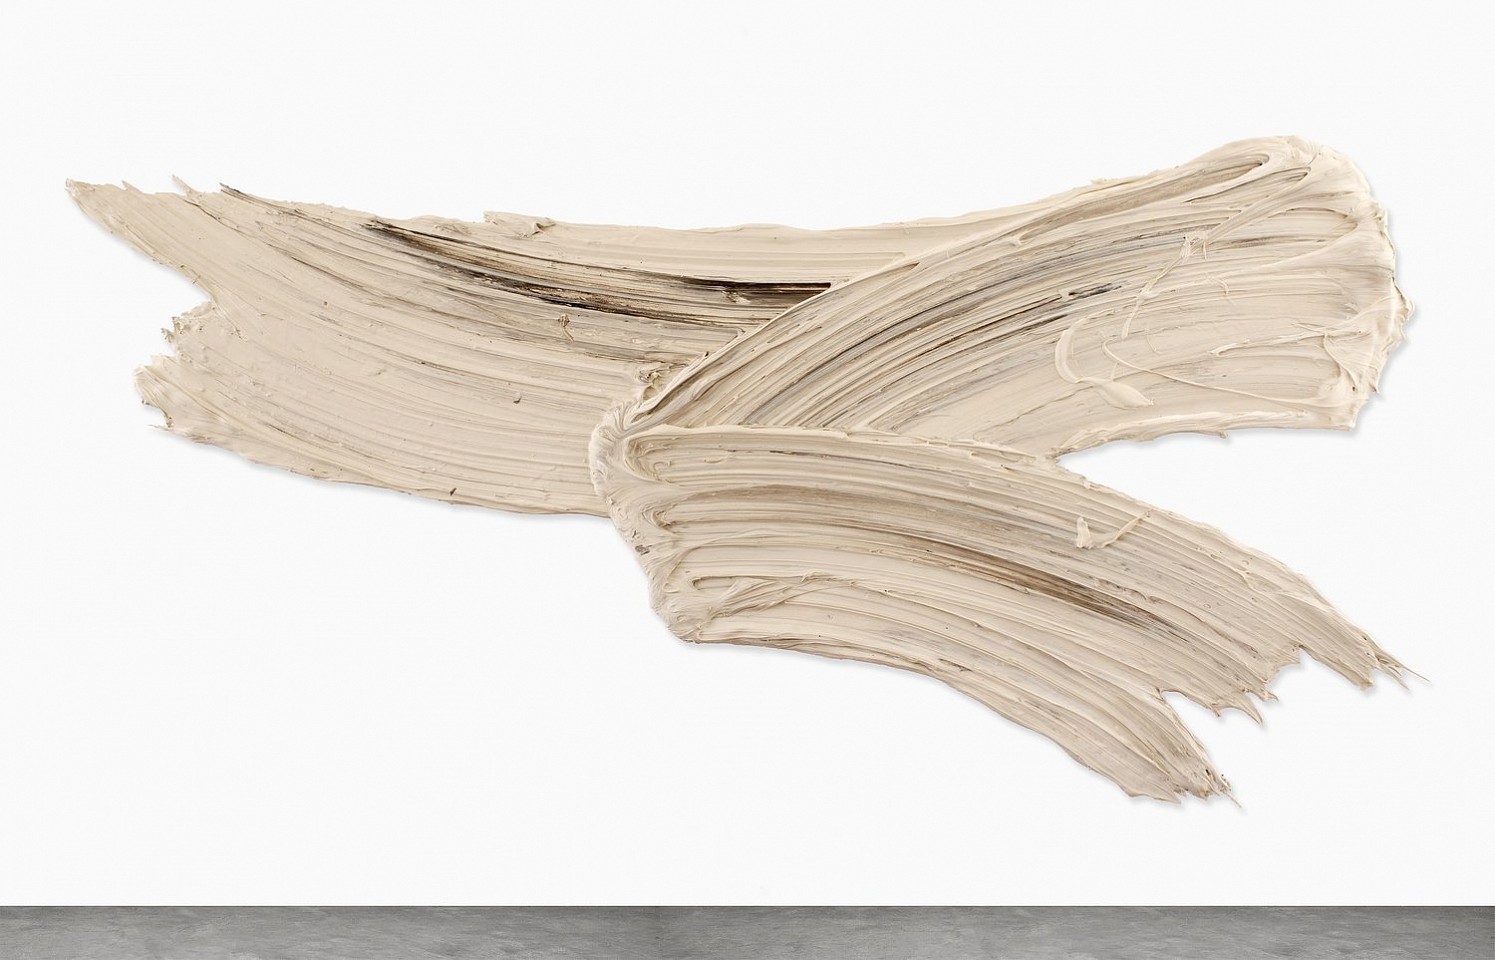 Donald Martiny, Taino, 2017
Polymer and Pigment Mounted on Aluminum, 46 x 86 in.